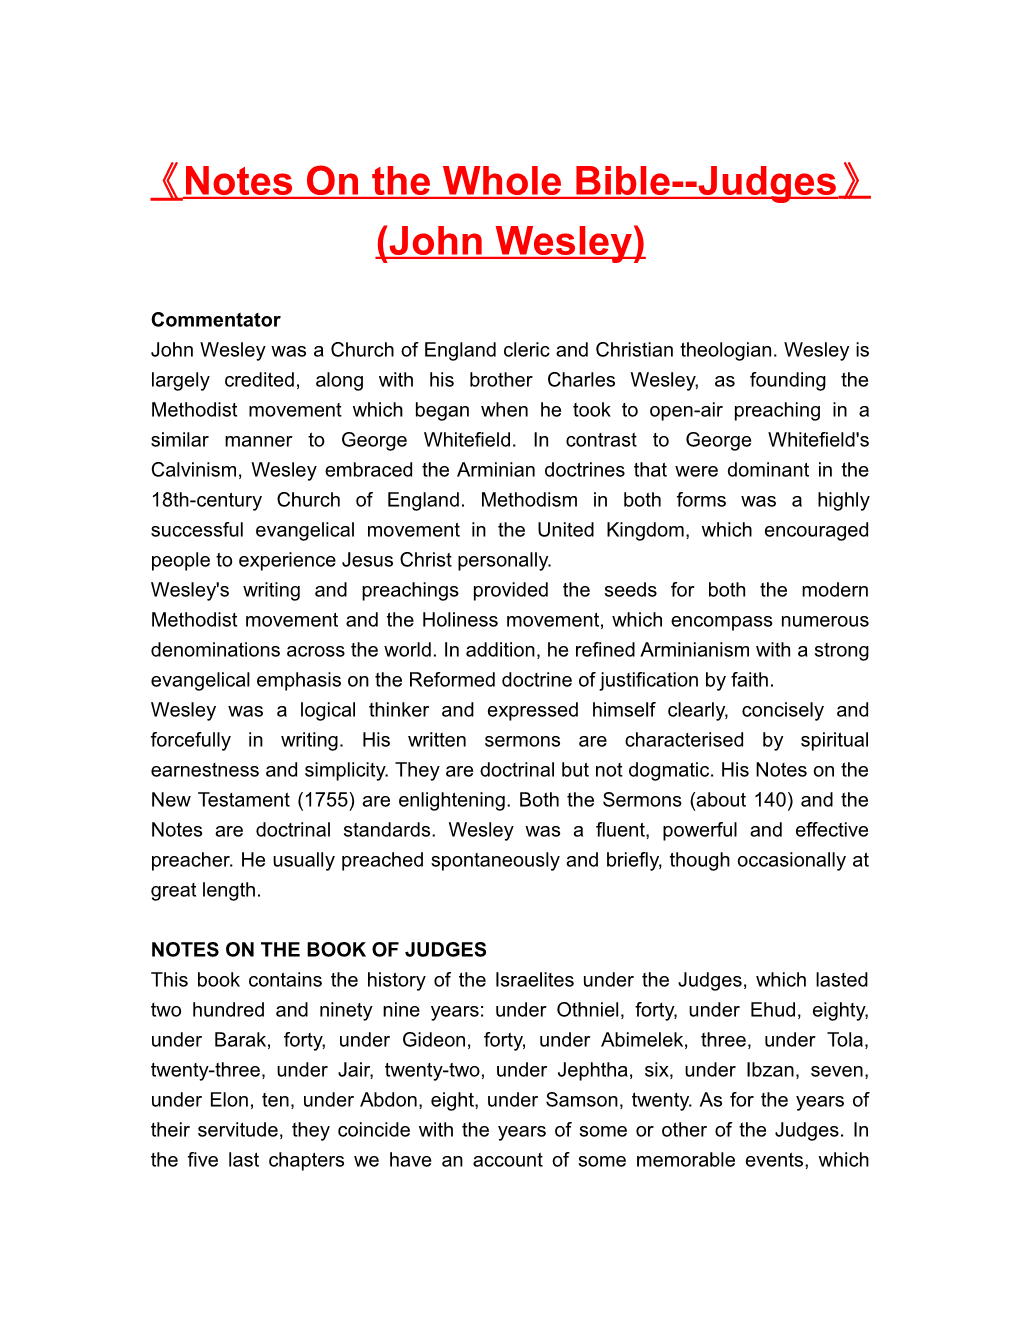 Notes on the Whole Bible Judges (John Wesley)